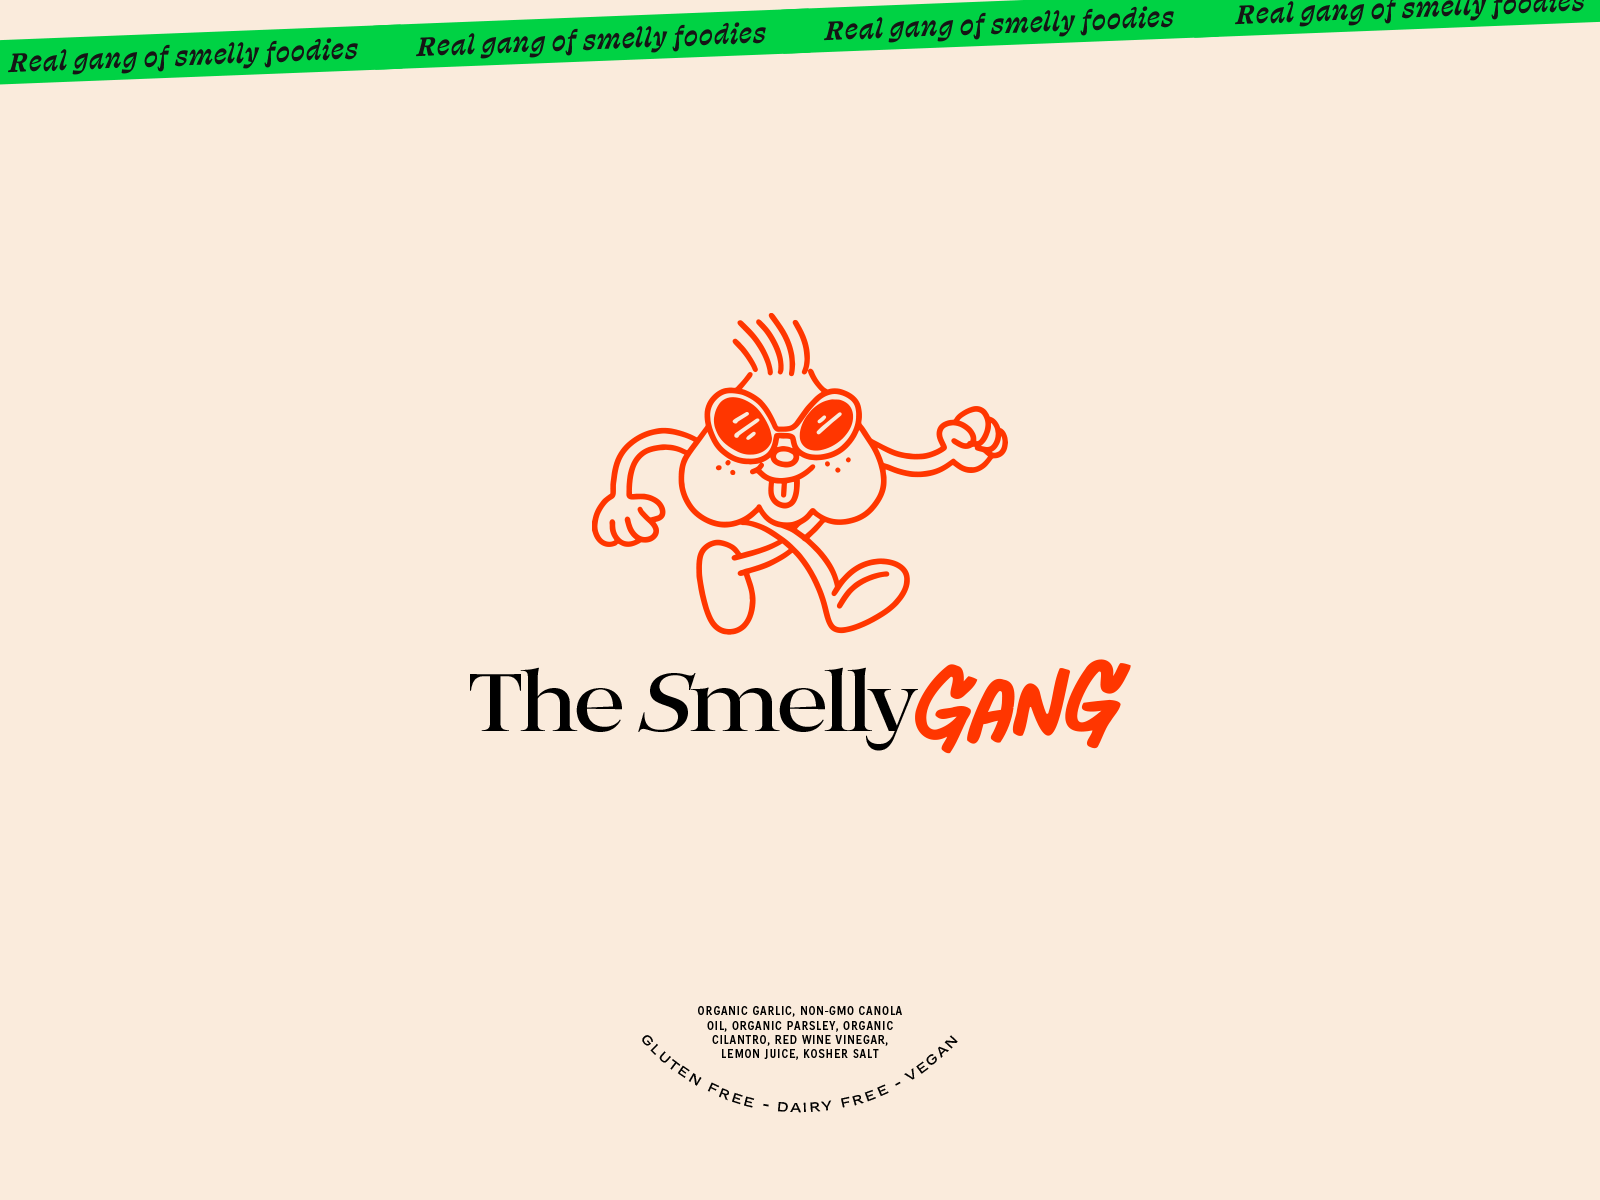 The Smelly Gang